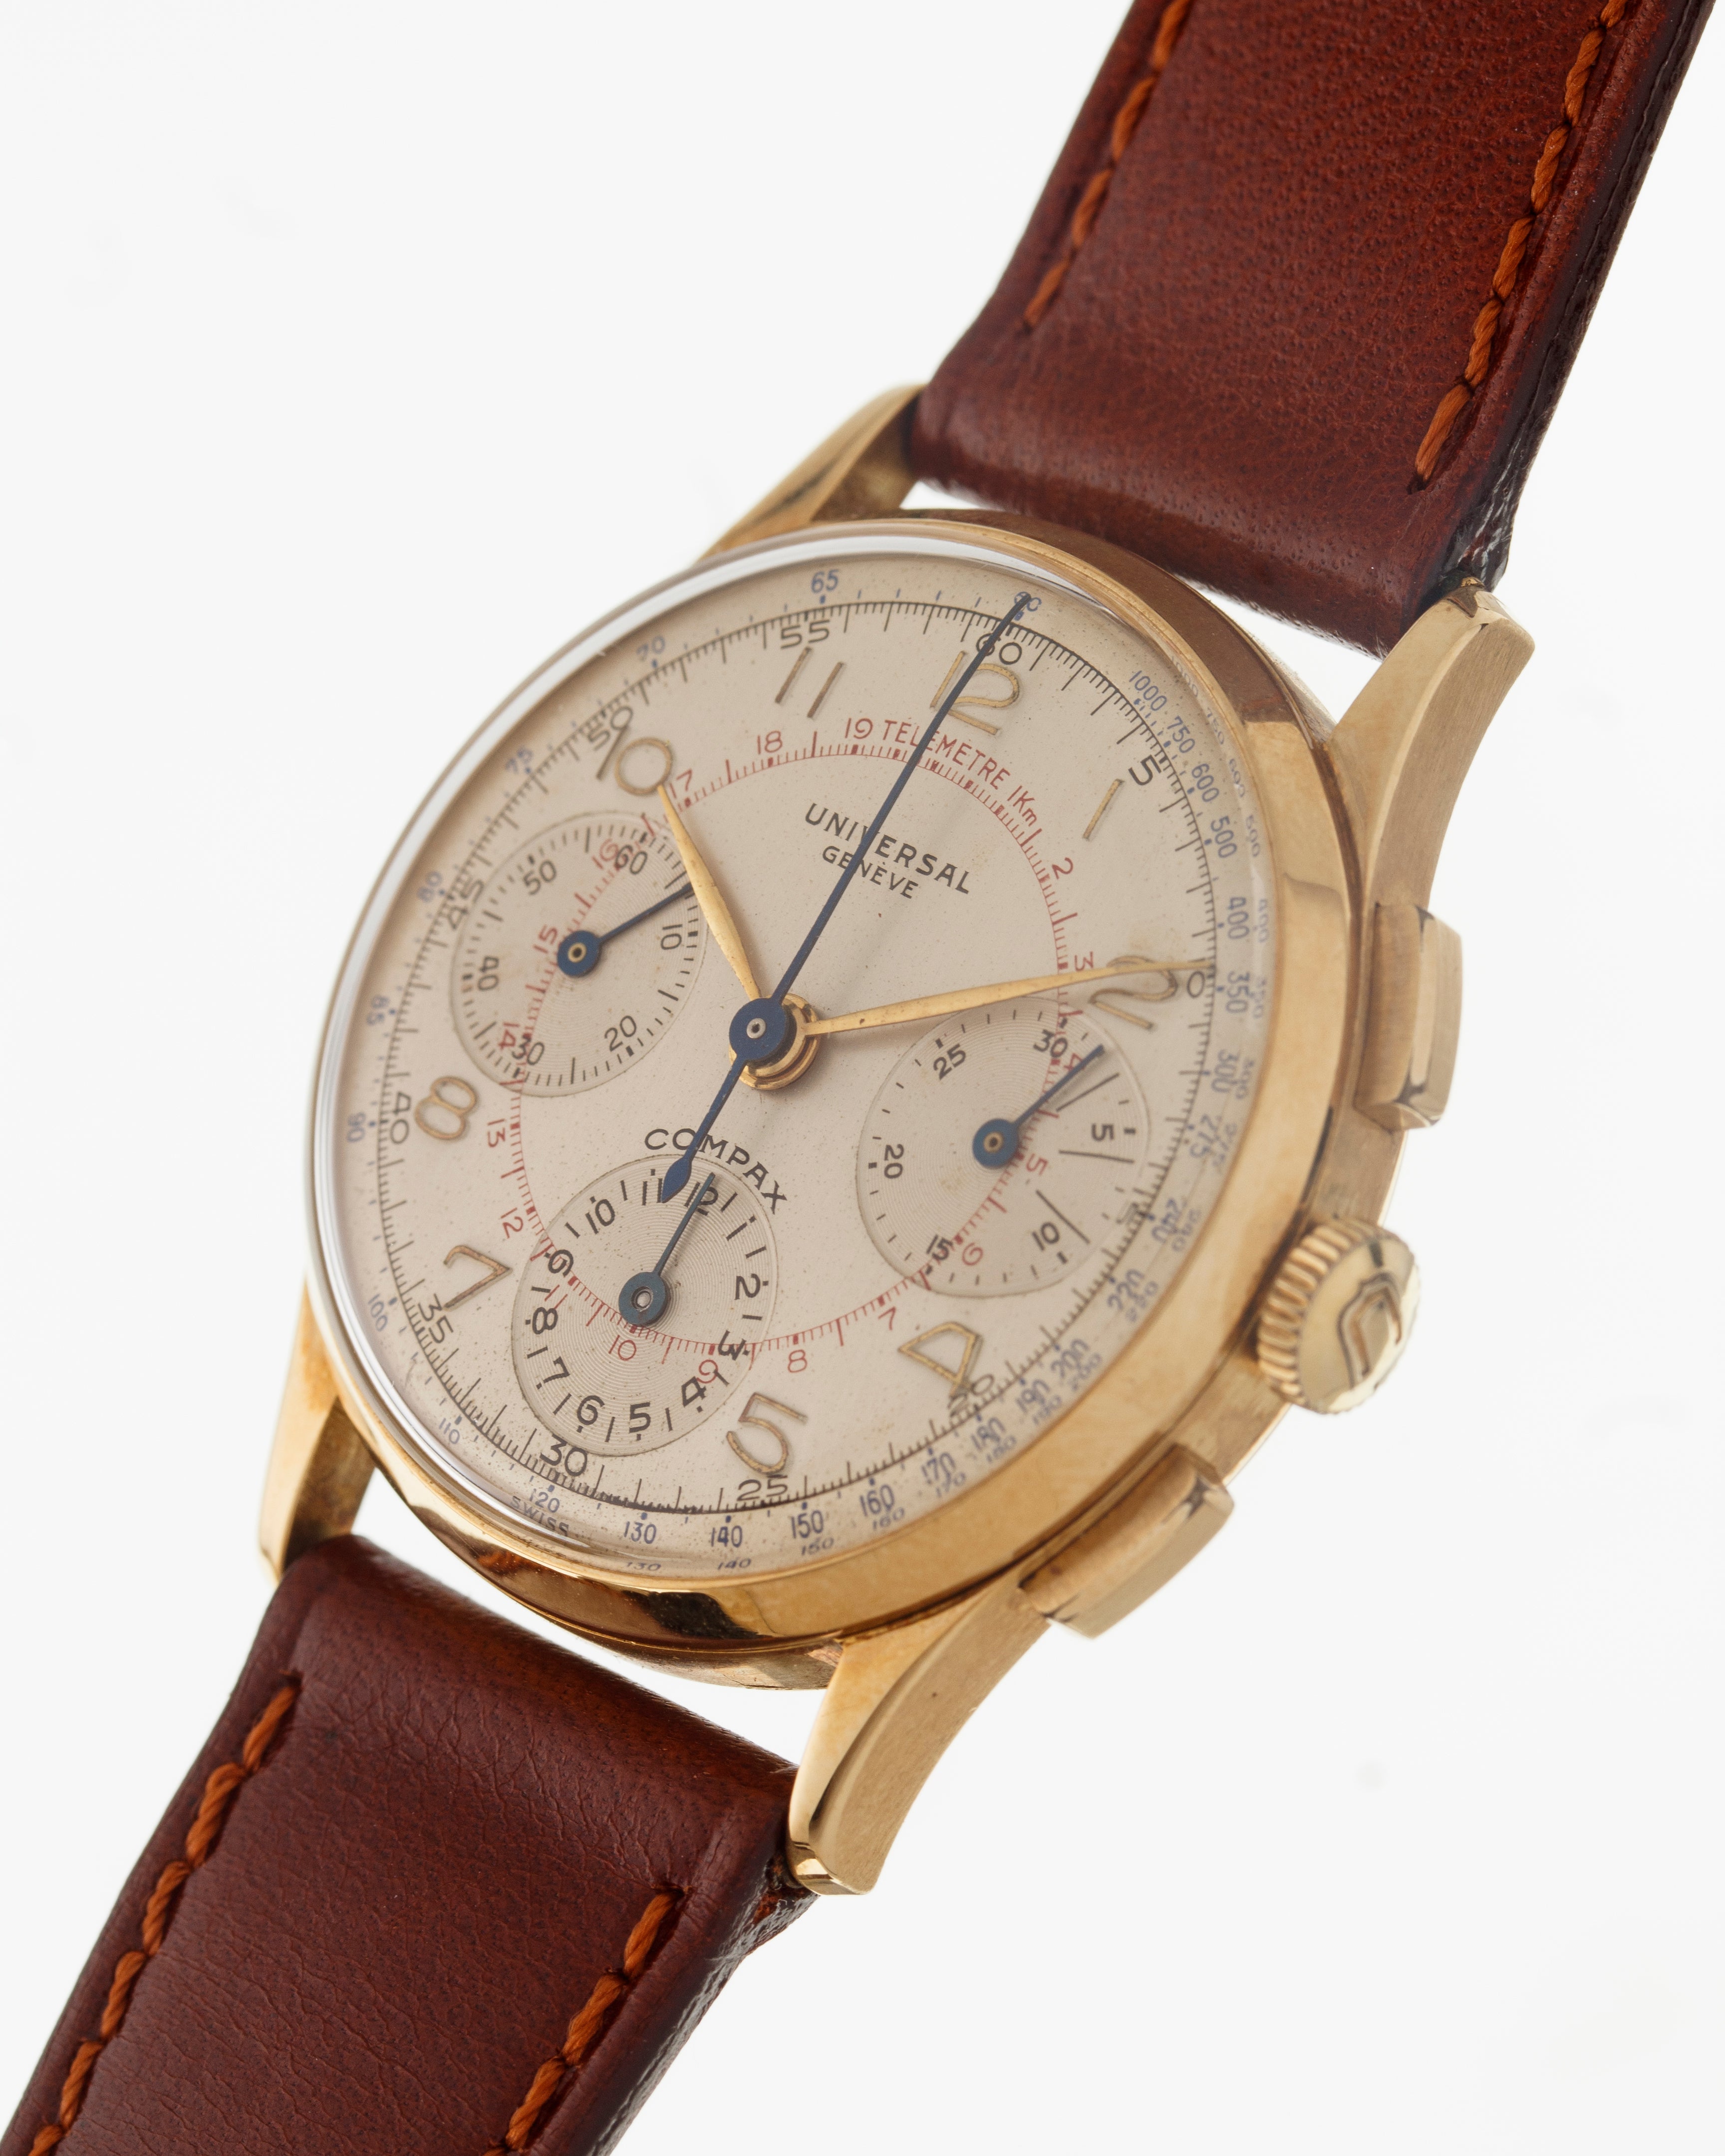 Universal Genève Ref. 12494 Compax - yellow gold with white dial